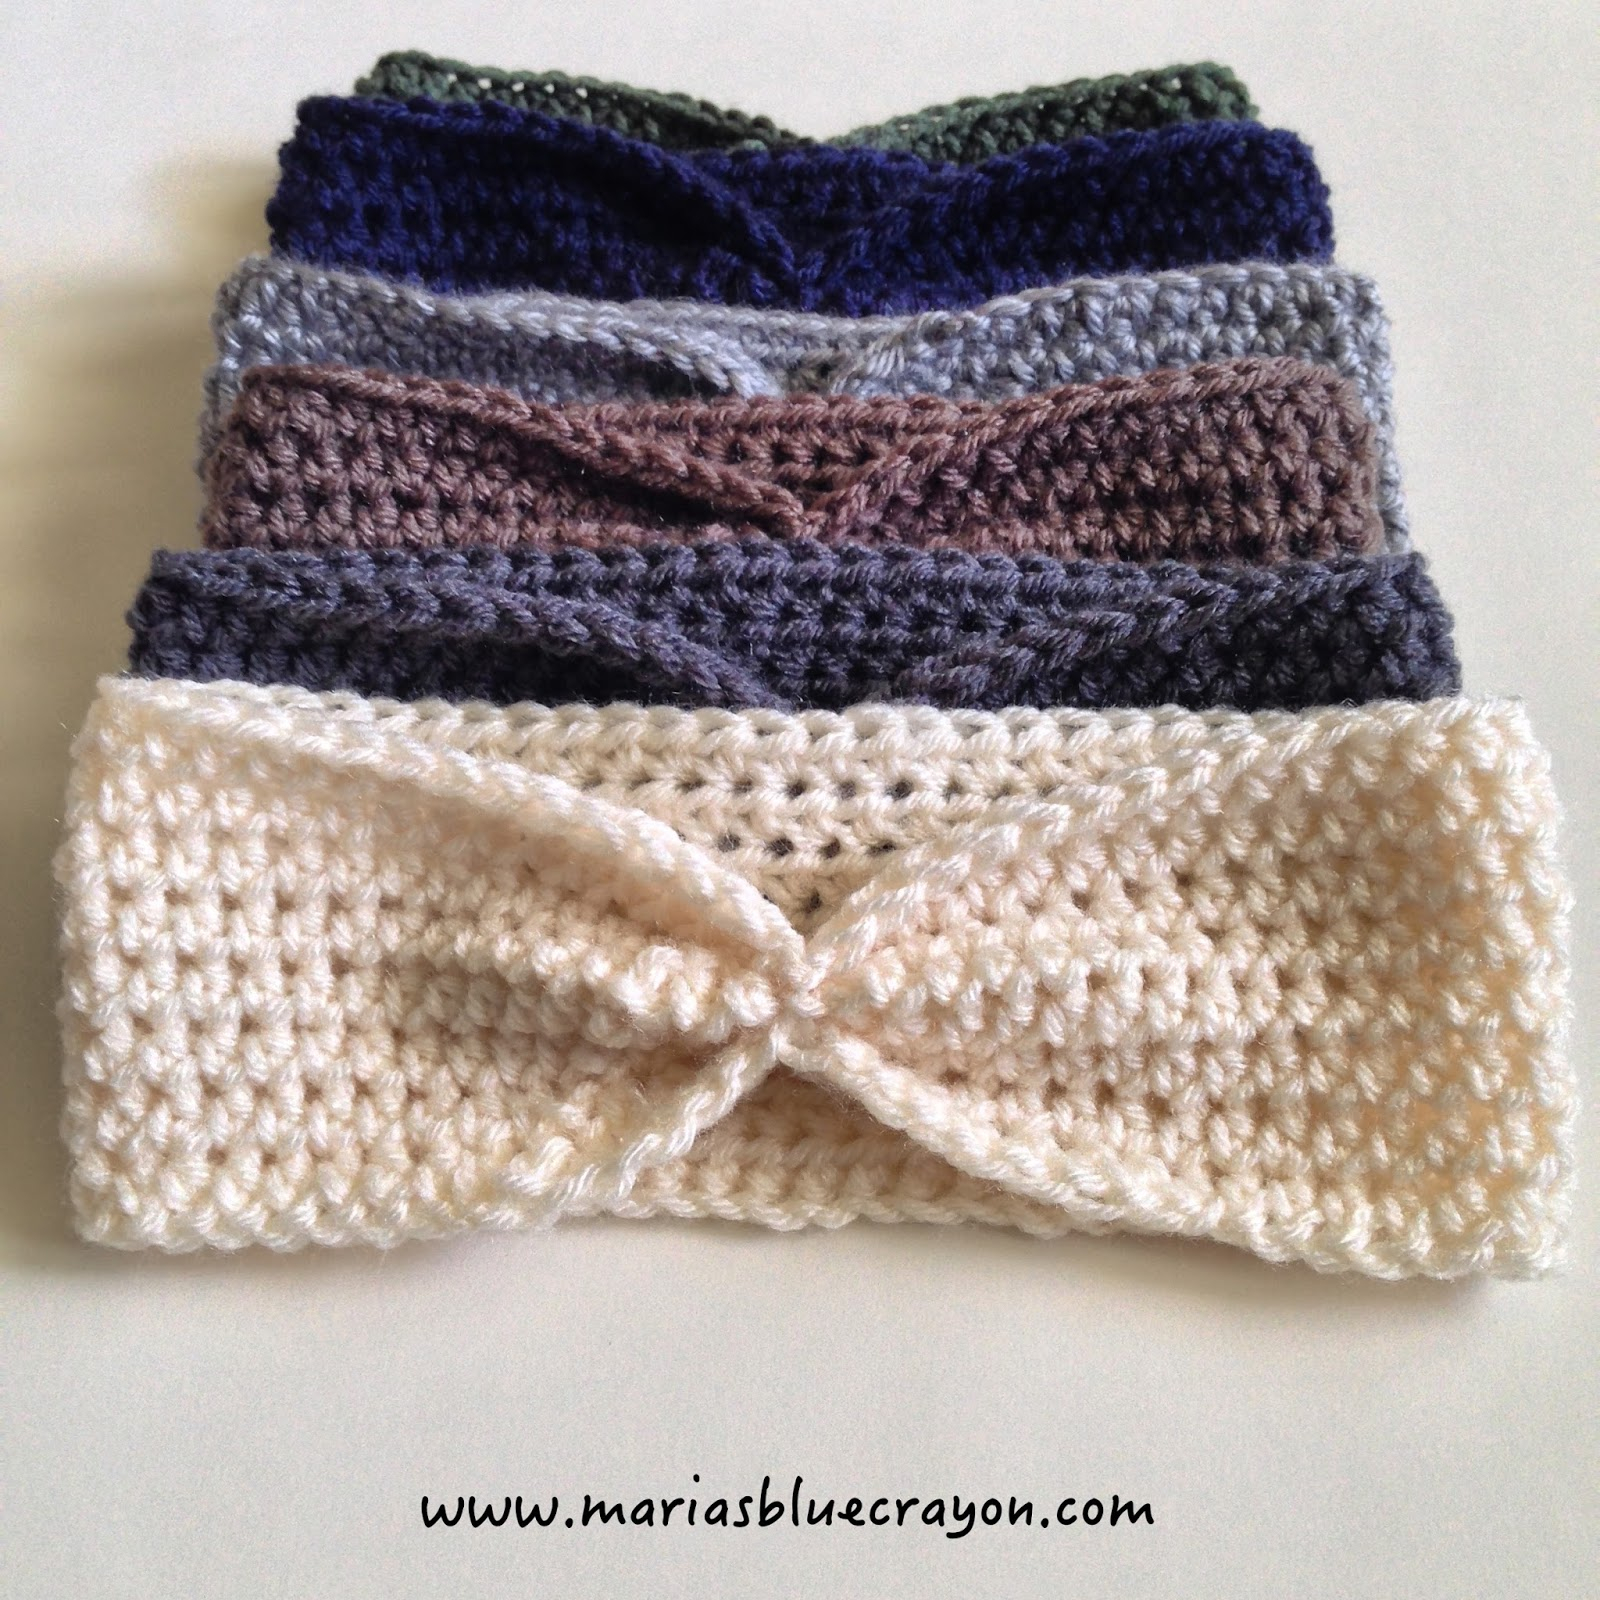 Crochet For Beginners Patterns Free Simple Crochet Ear Warmer Free Pattern For Beginners